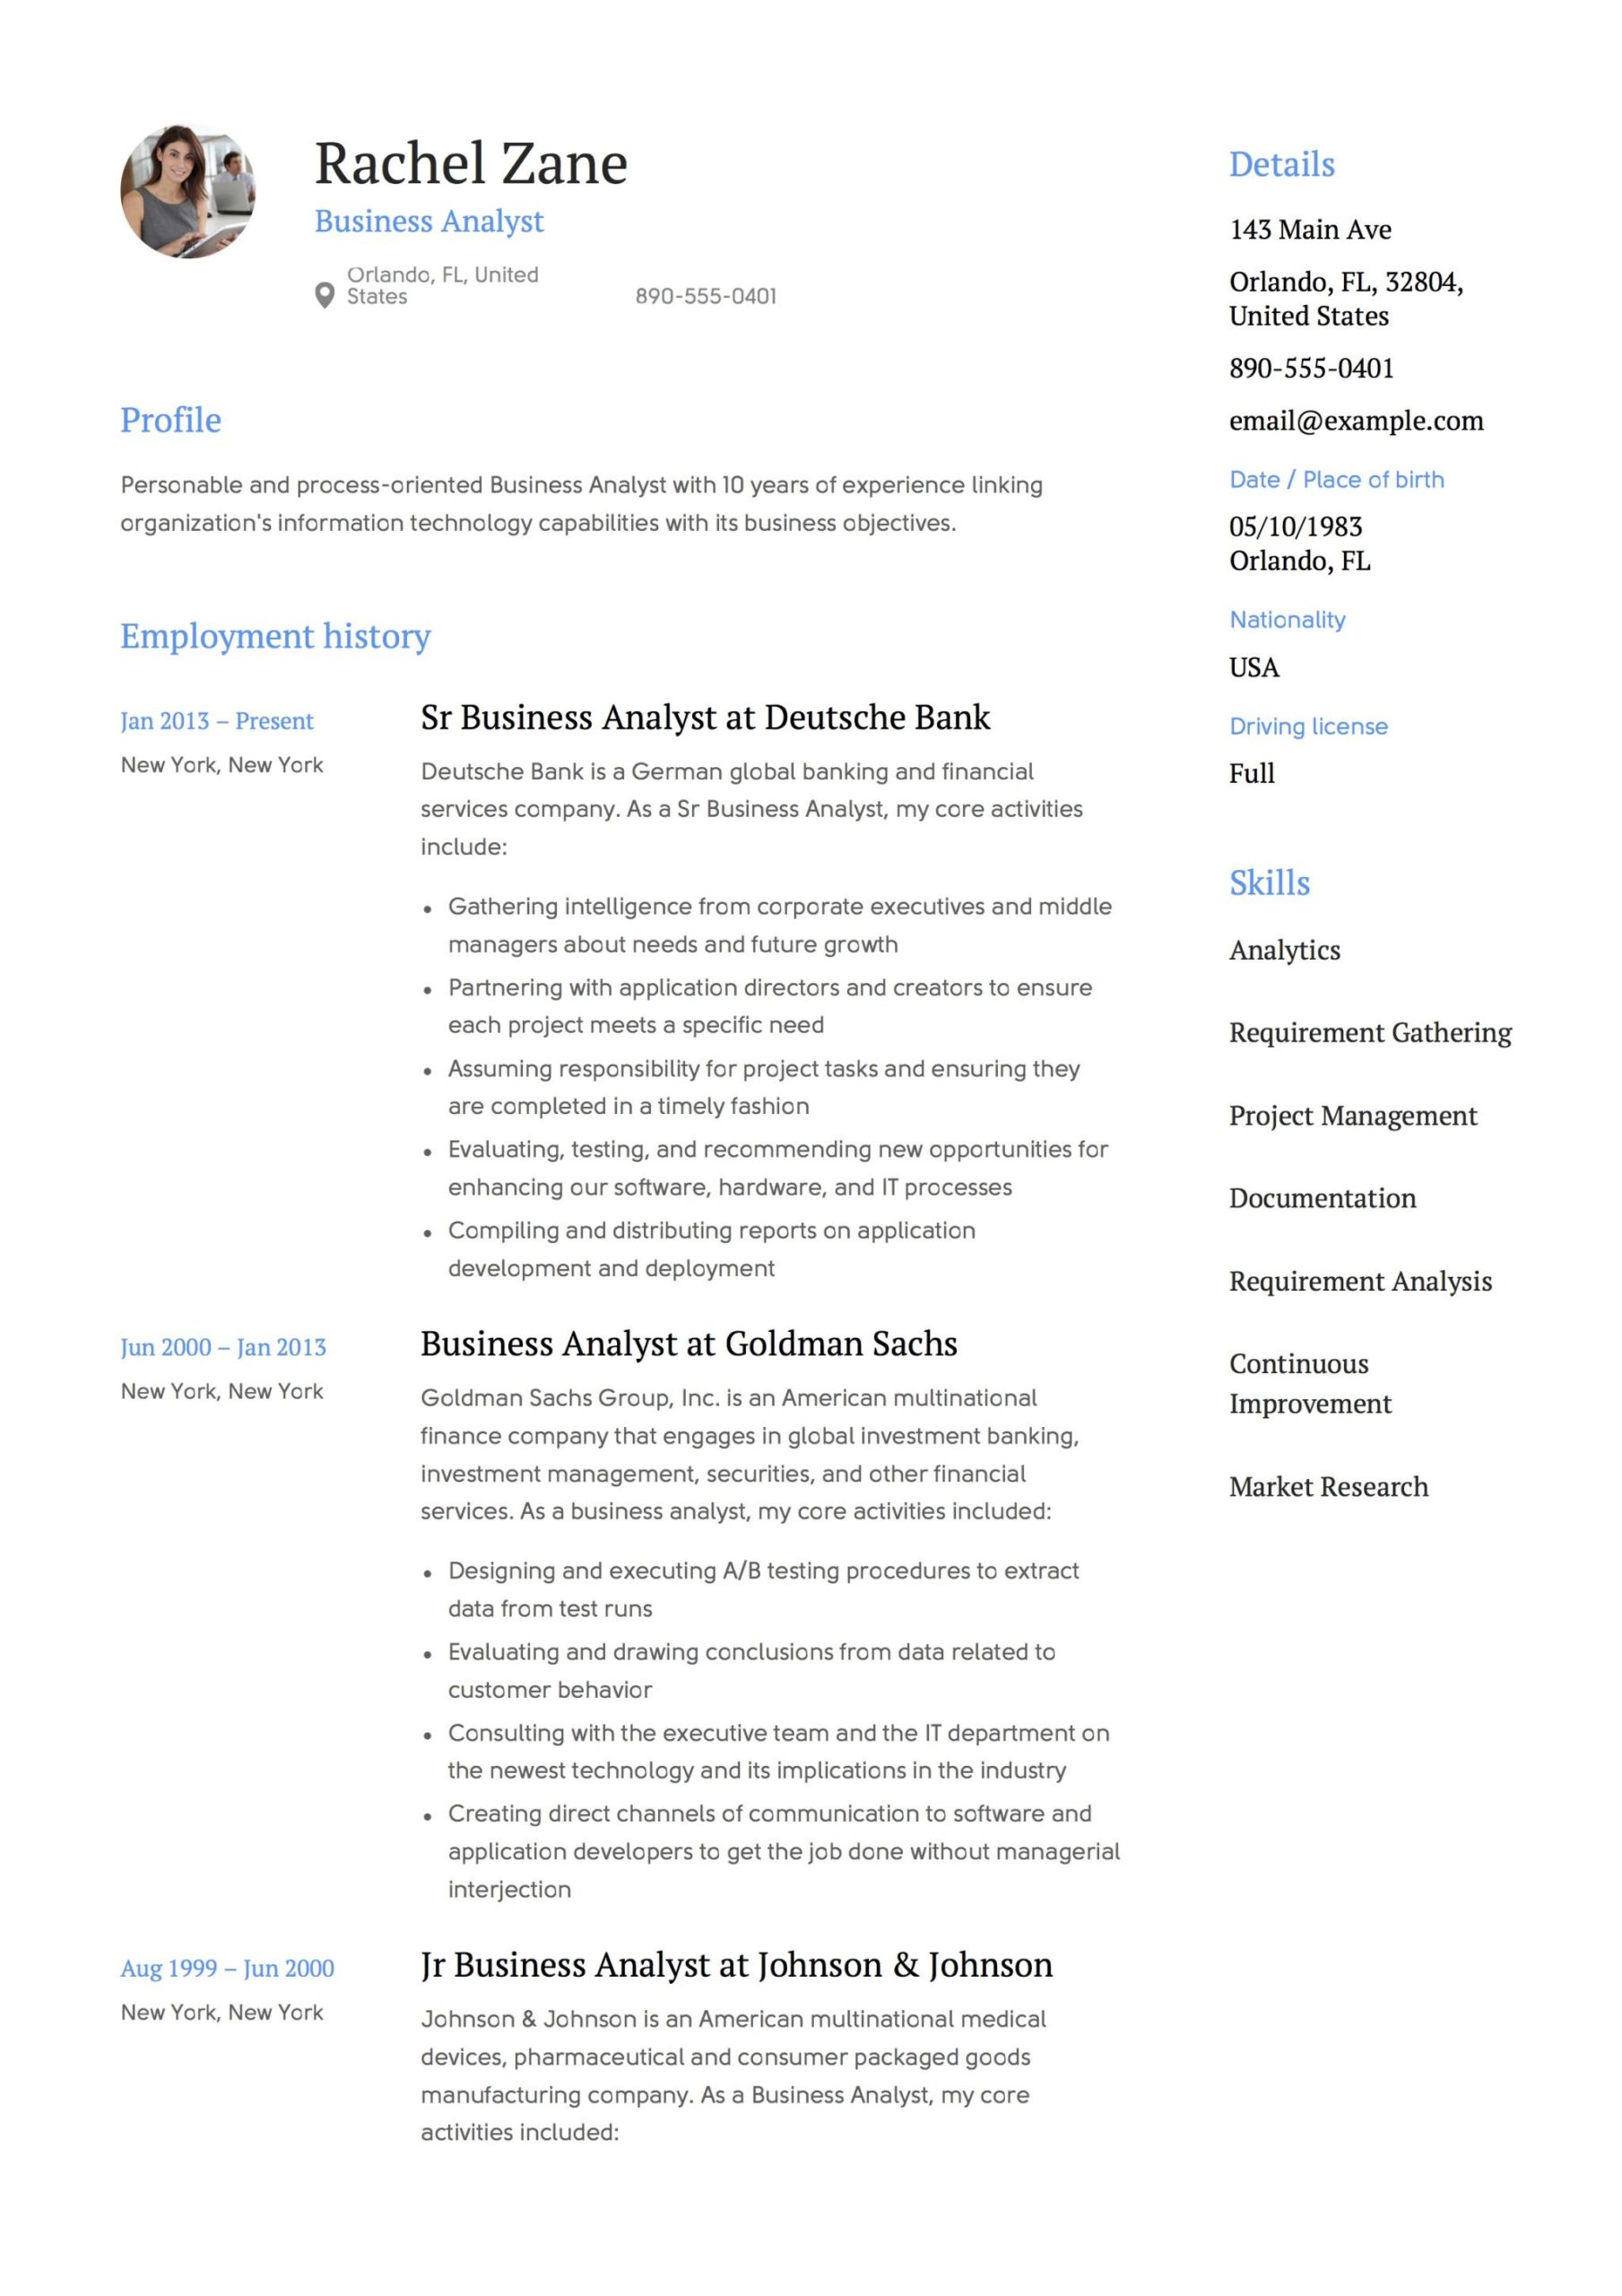 Sample Resume for Business Analyst Job Business Analyst Resume Examples & Writing Guide 2022